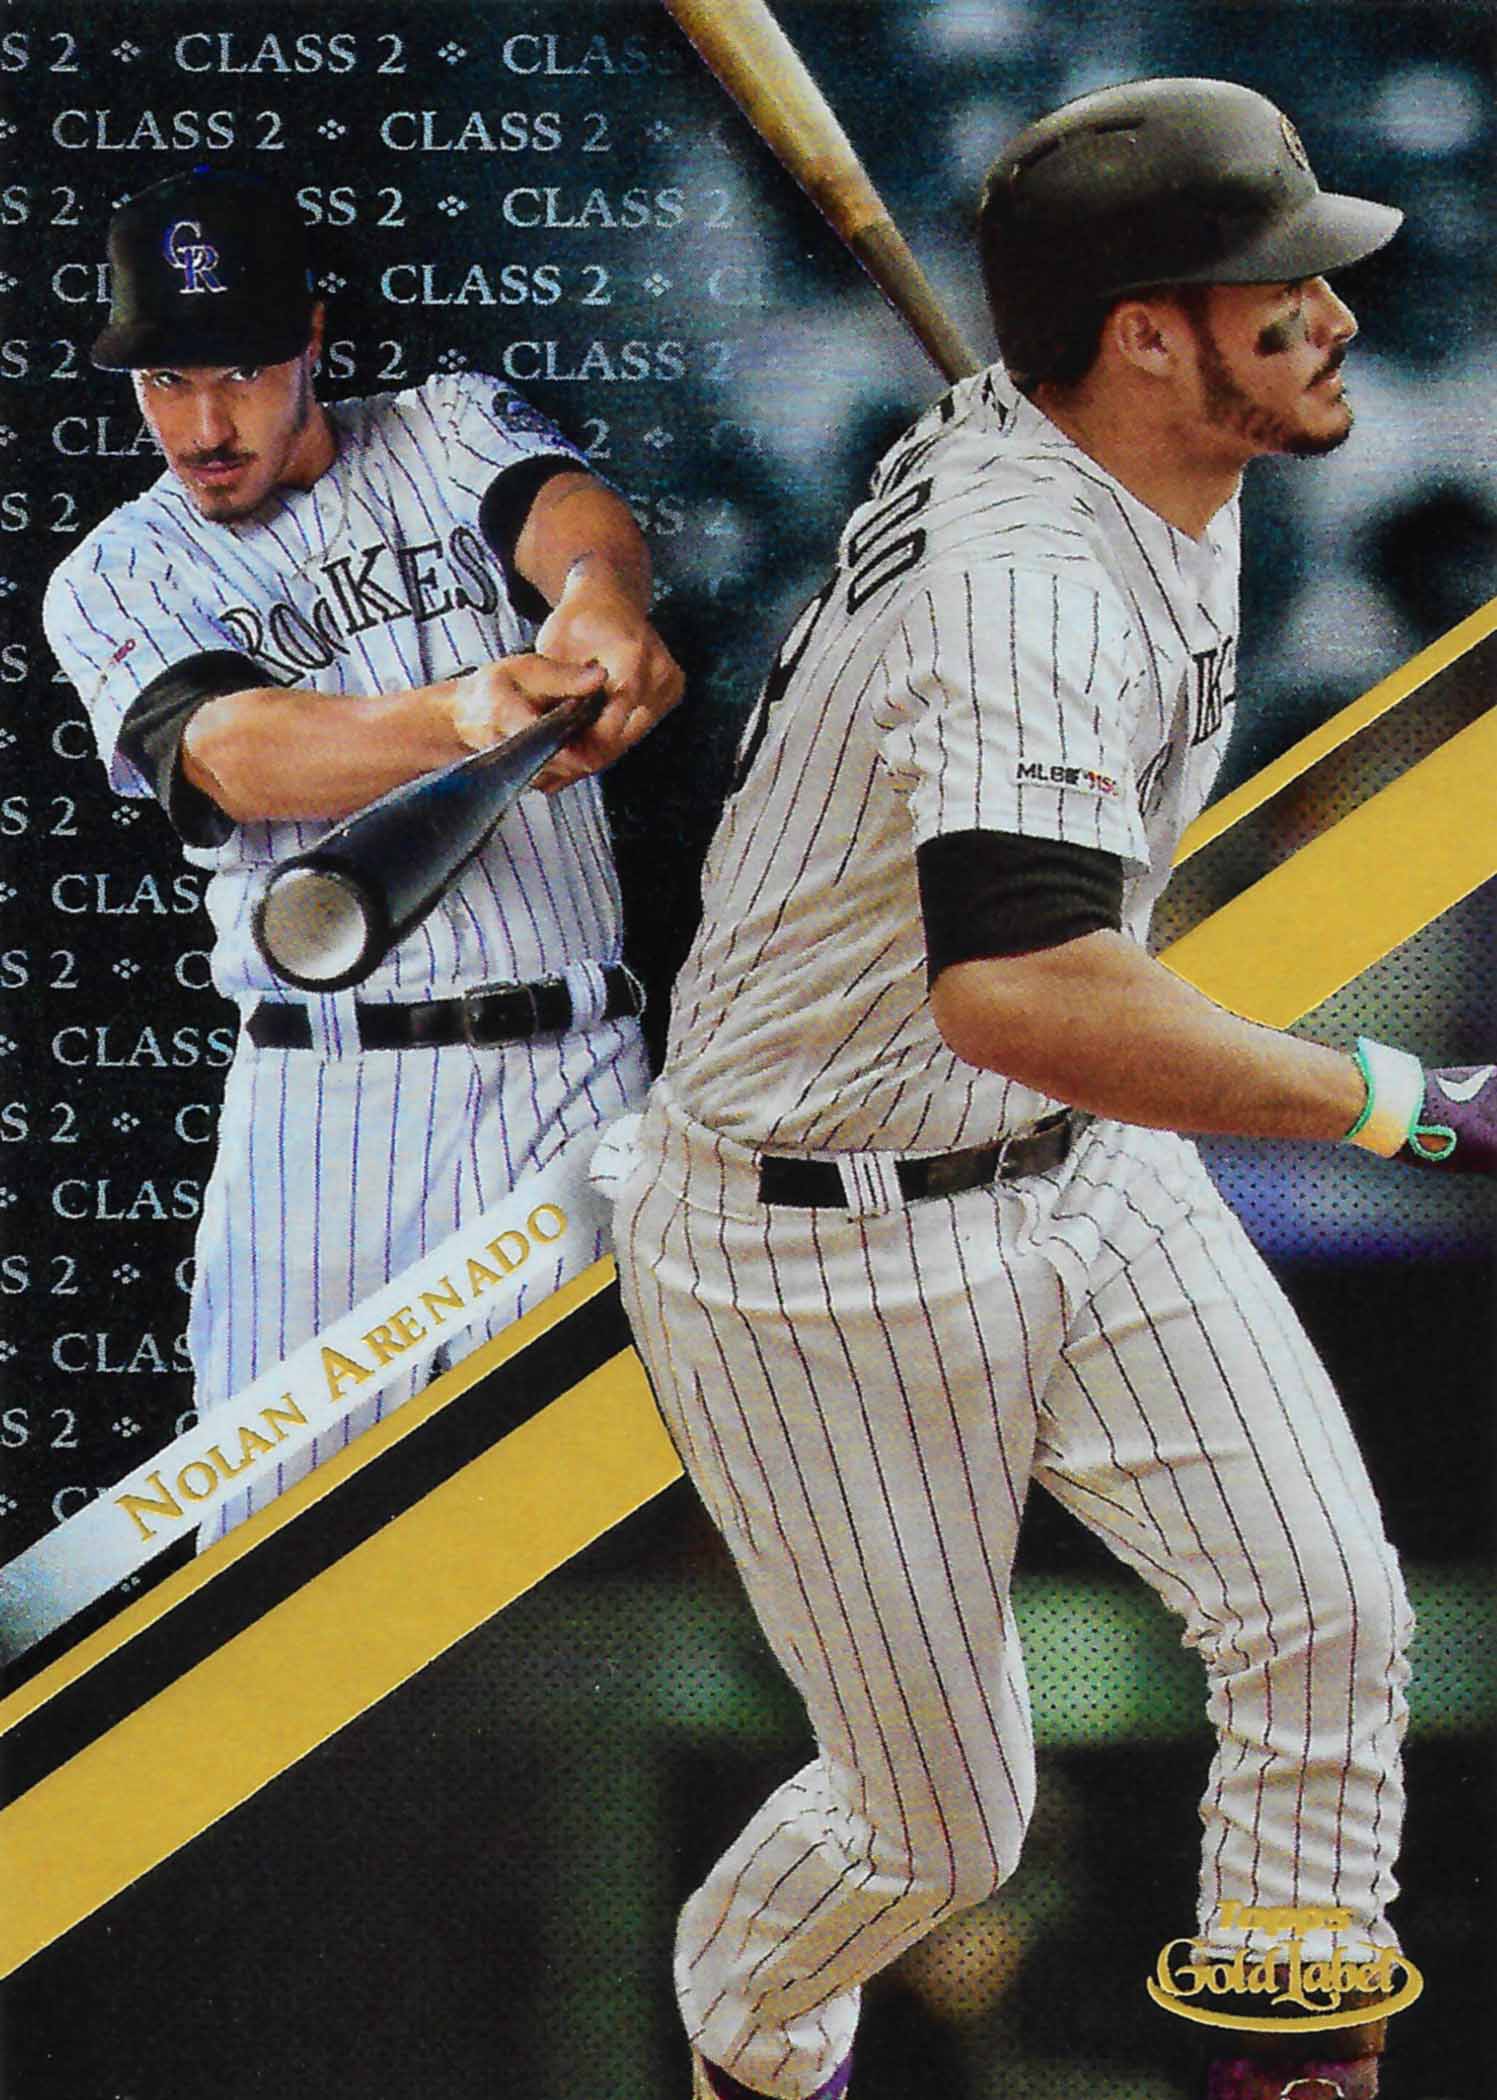 2019 Topps Gold Label Class 2 Black